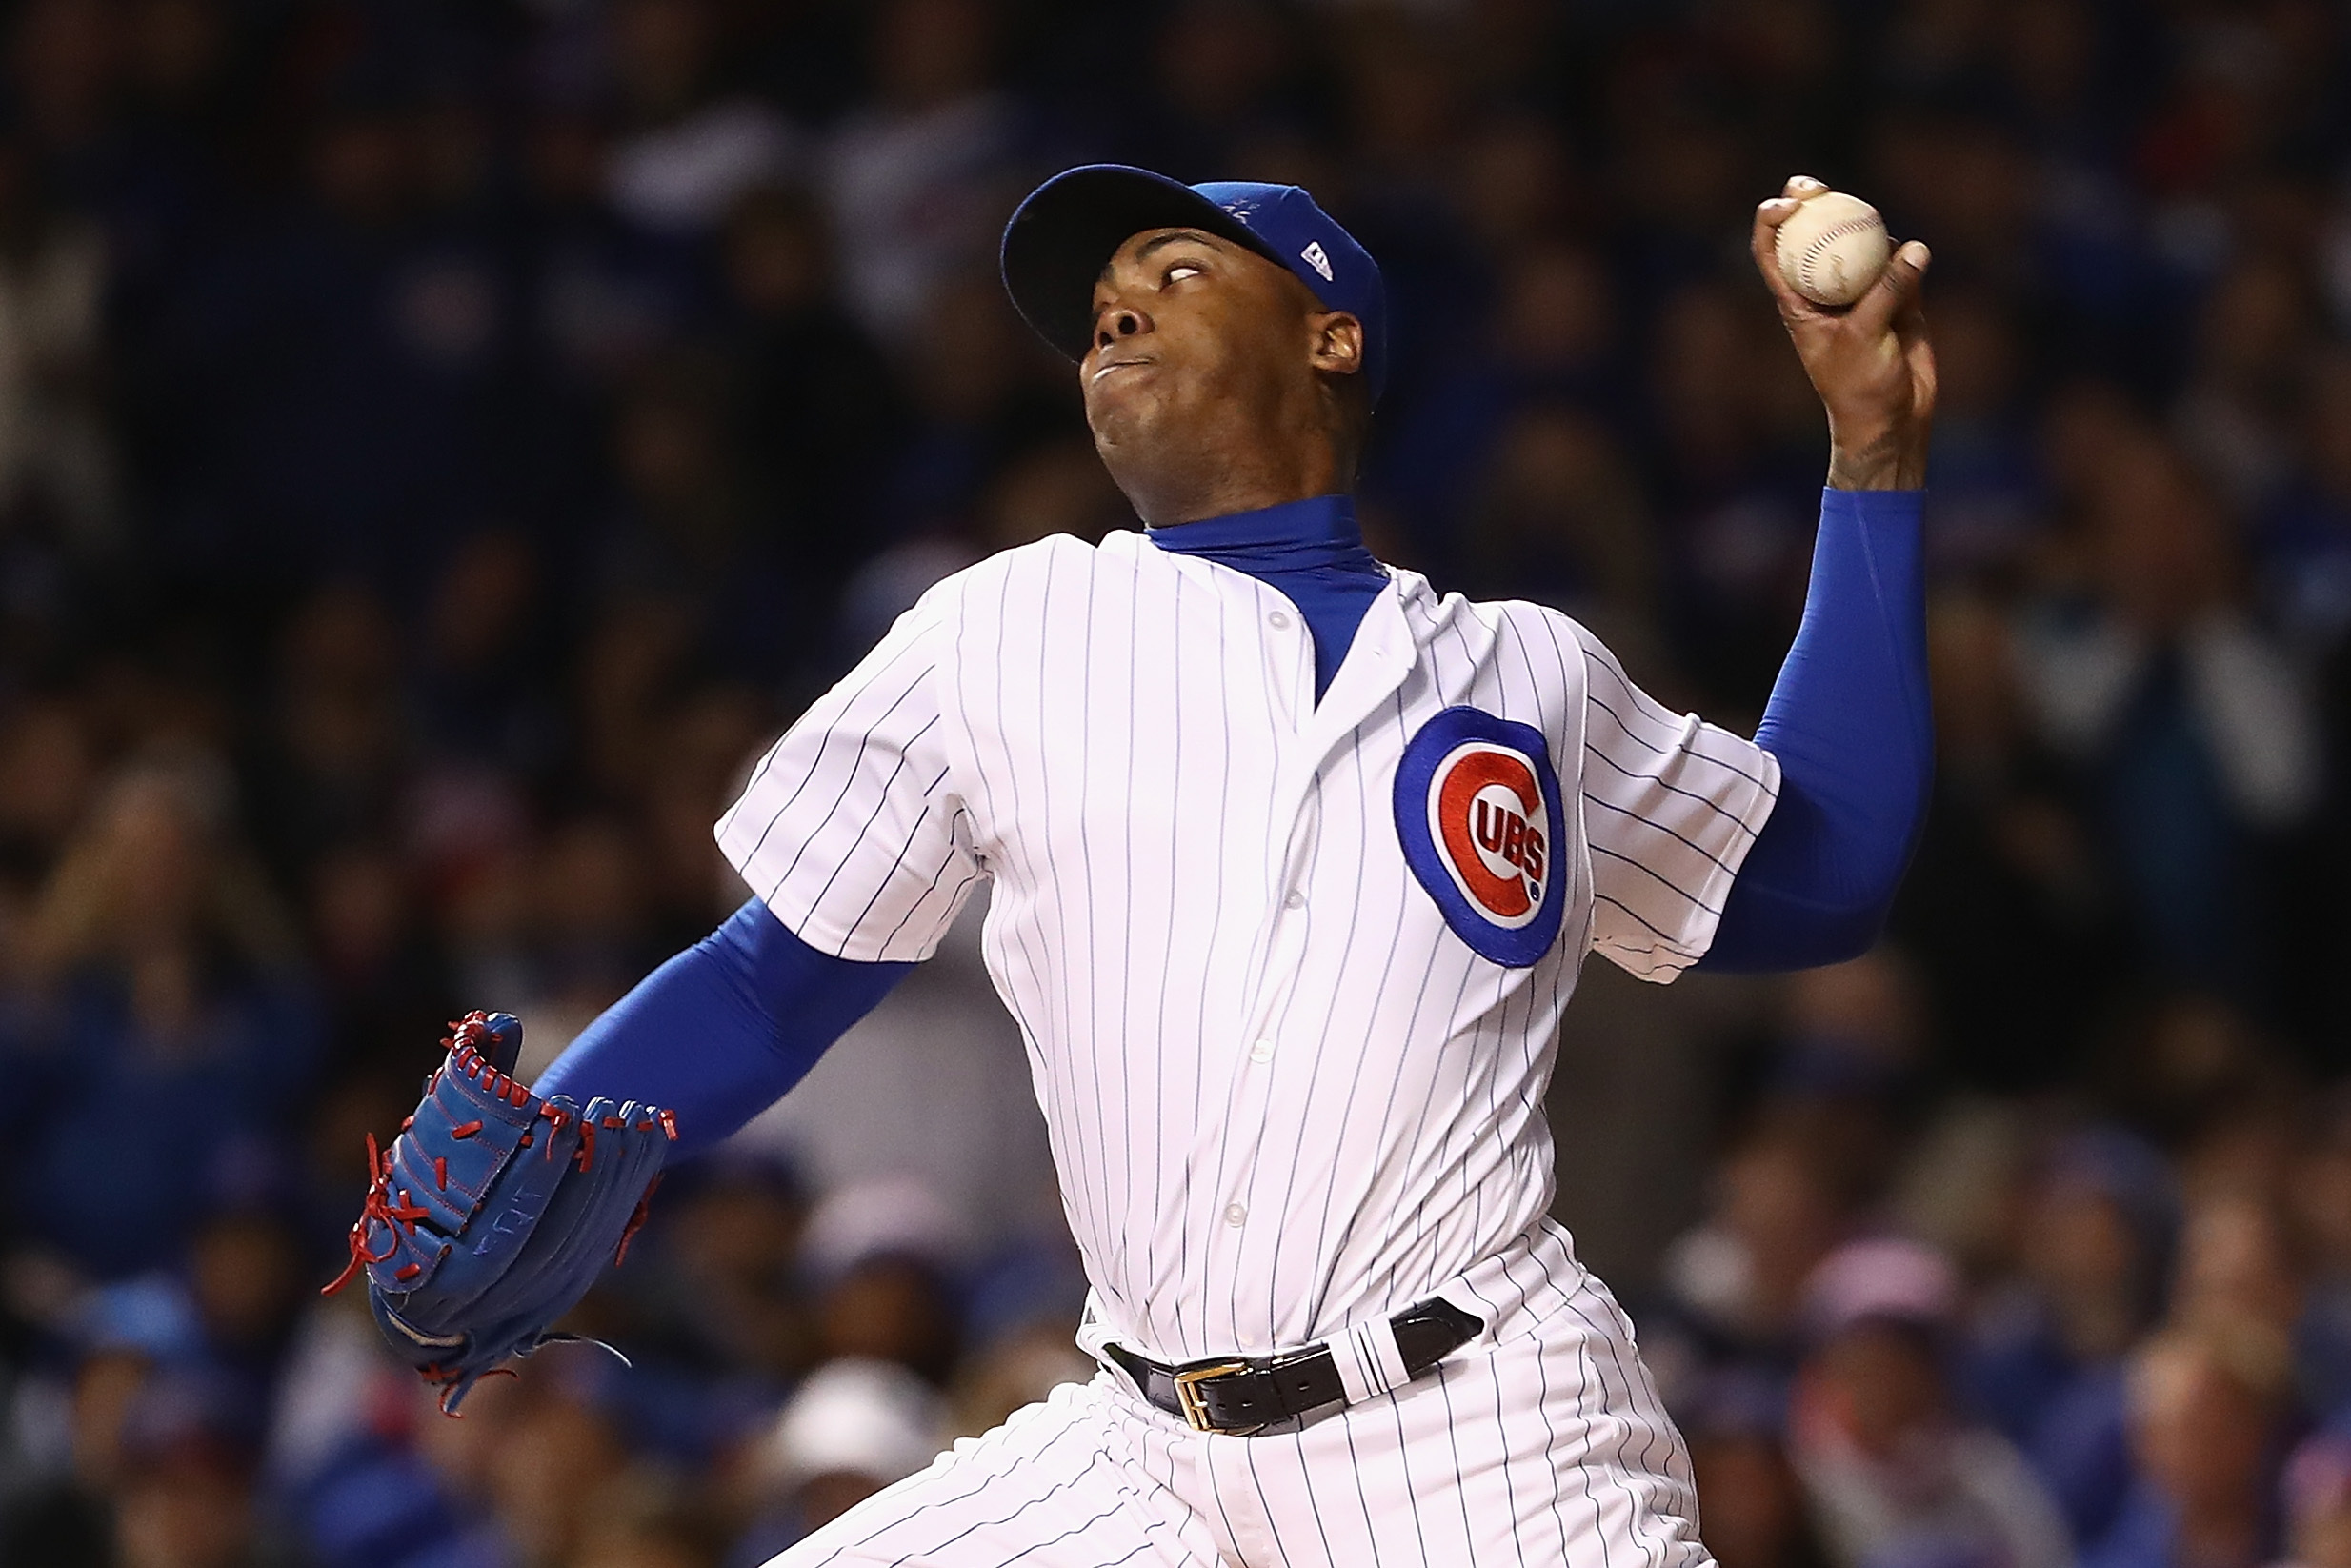 Aroldis Chapman And The 10 Most Stunning Records in Sports